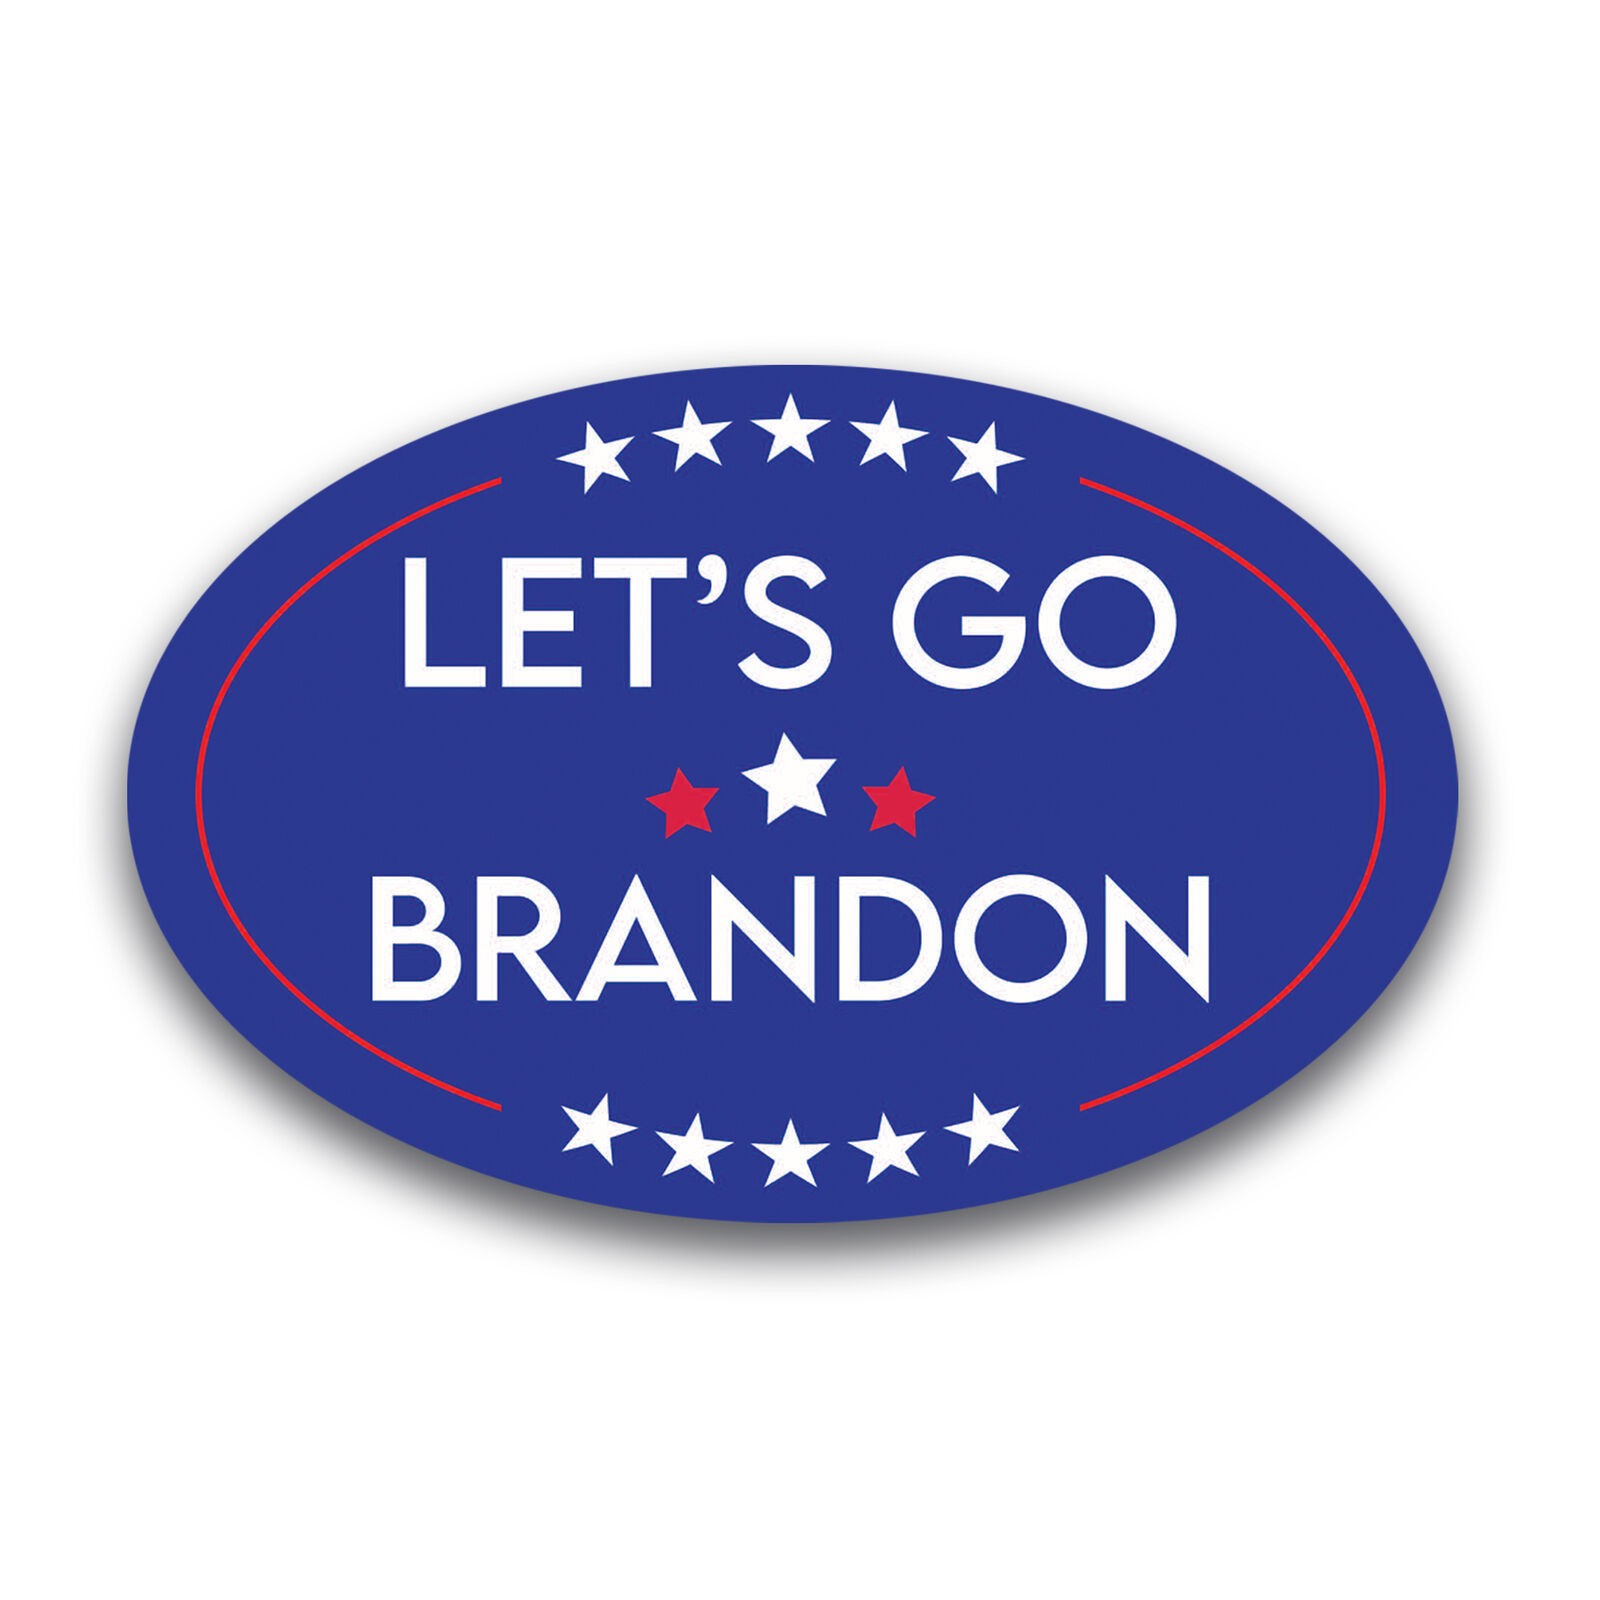 Let's Go Brandon Blue Oval Magnet Decal, 4x6 Inches, Automotive Magnet